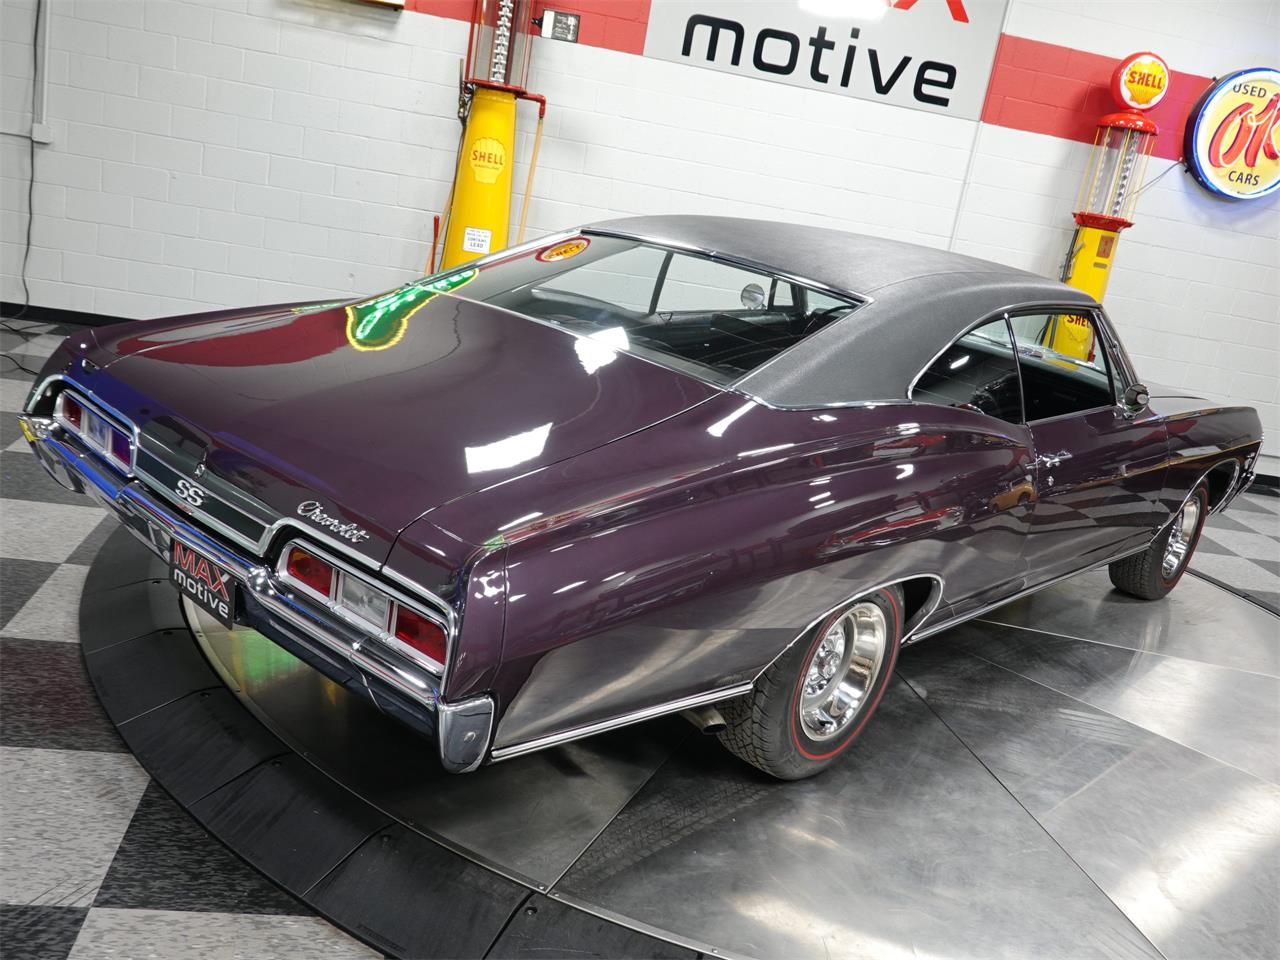 1967 Chevrolet ss 427, Pick of the Day: 1967 Chevrolet SS 427, ClassicCars.com Journal